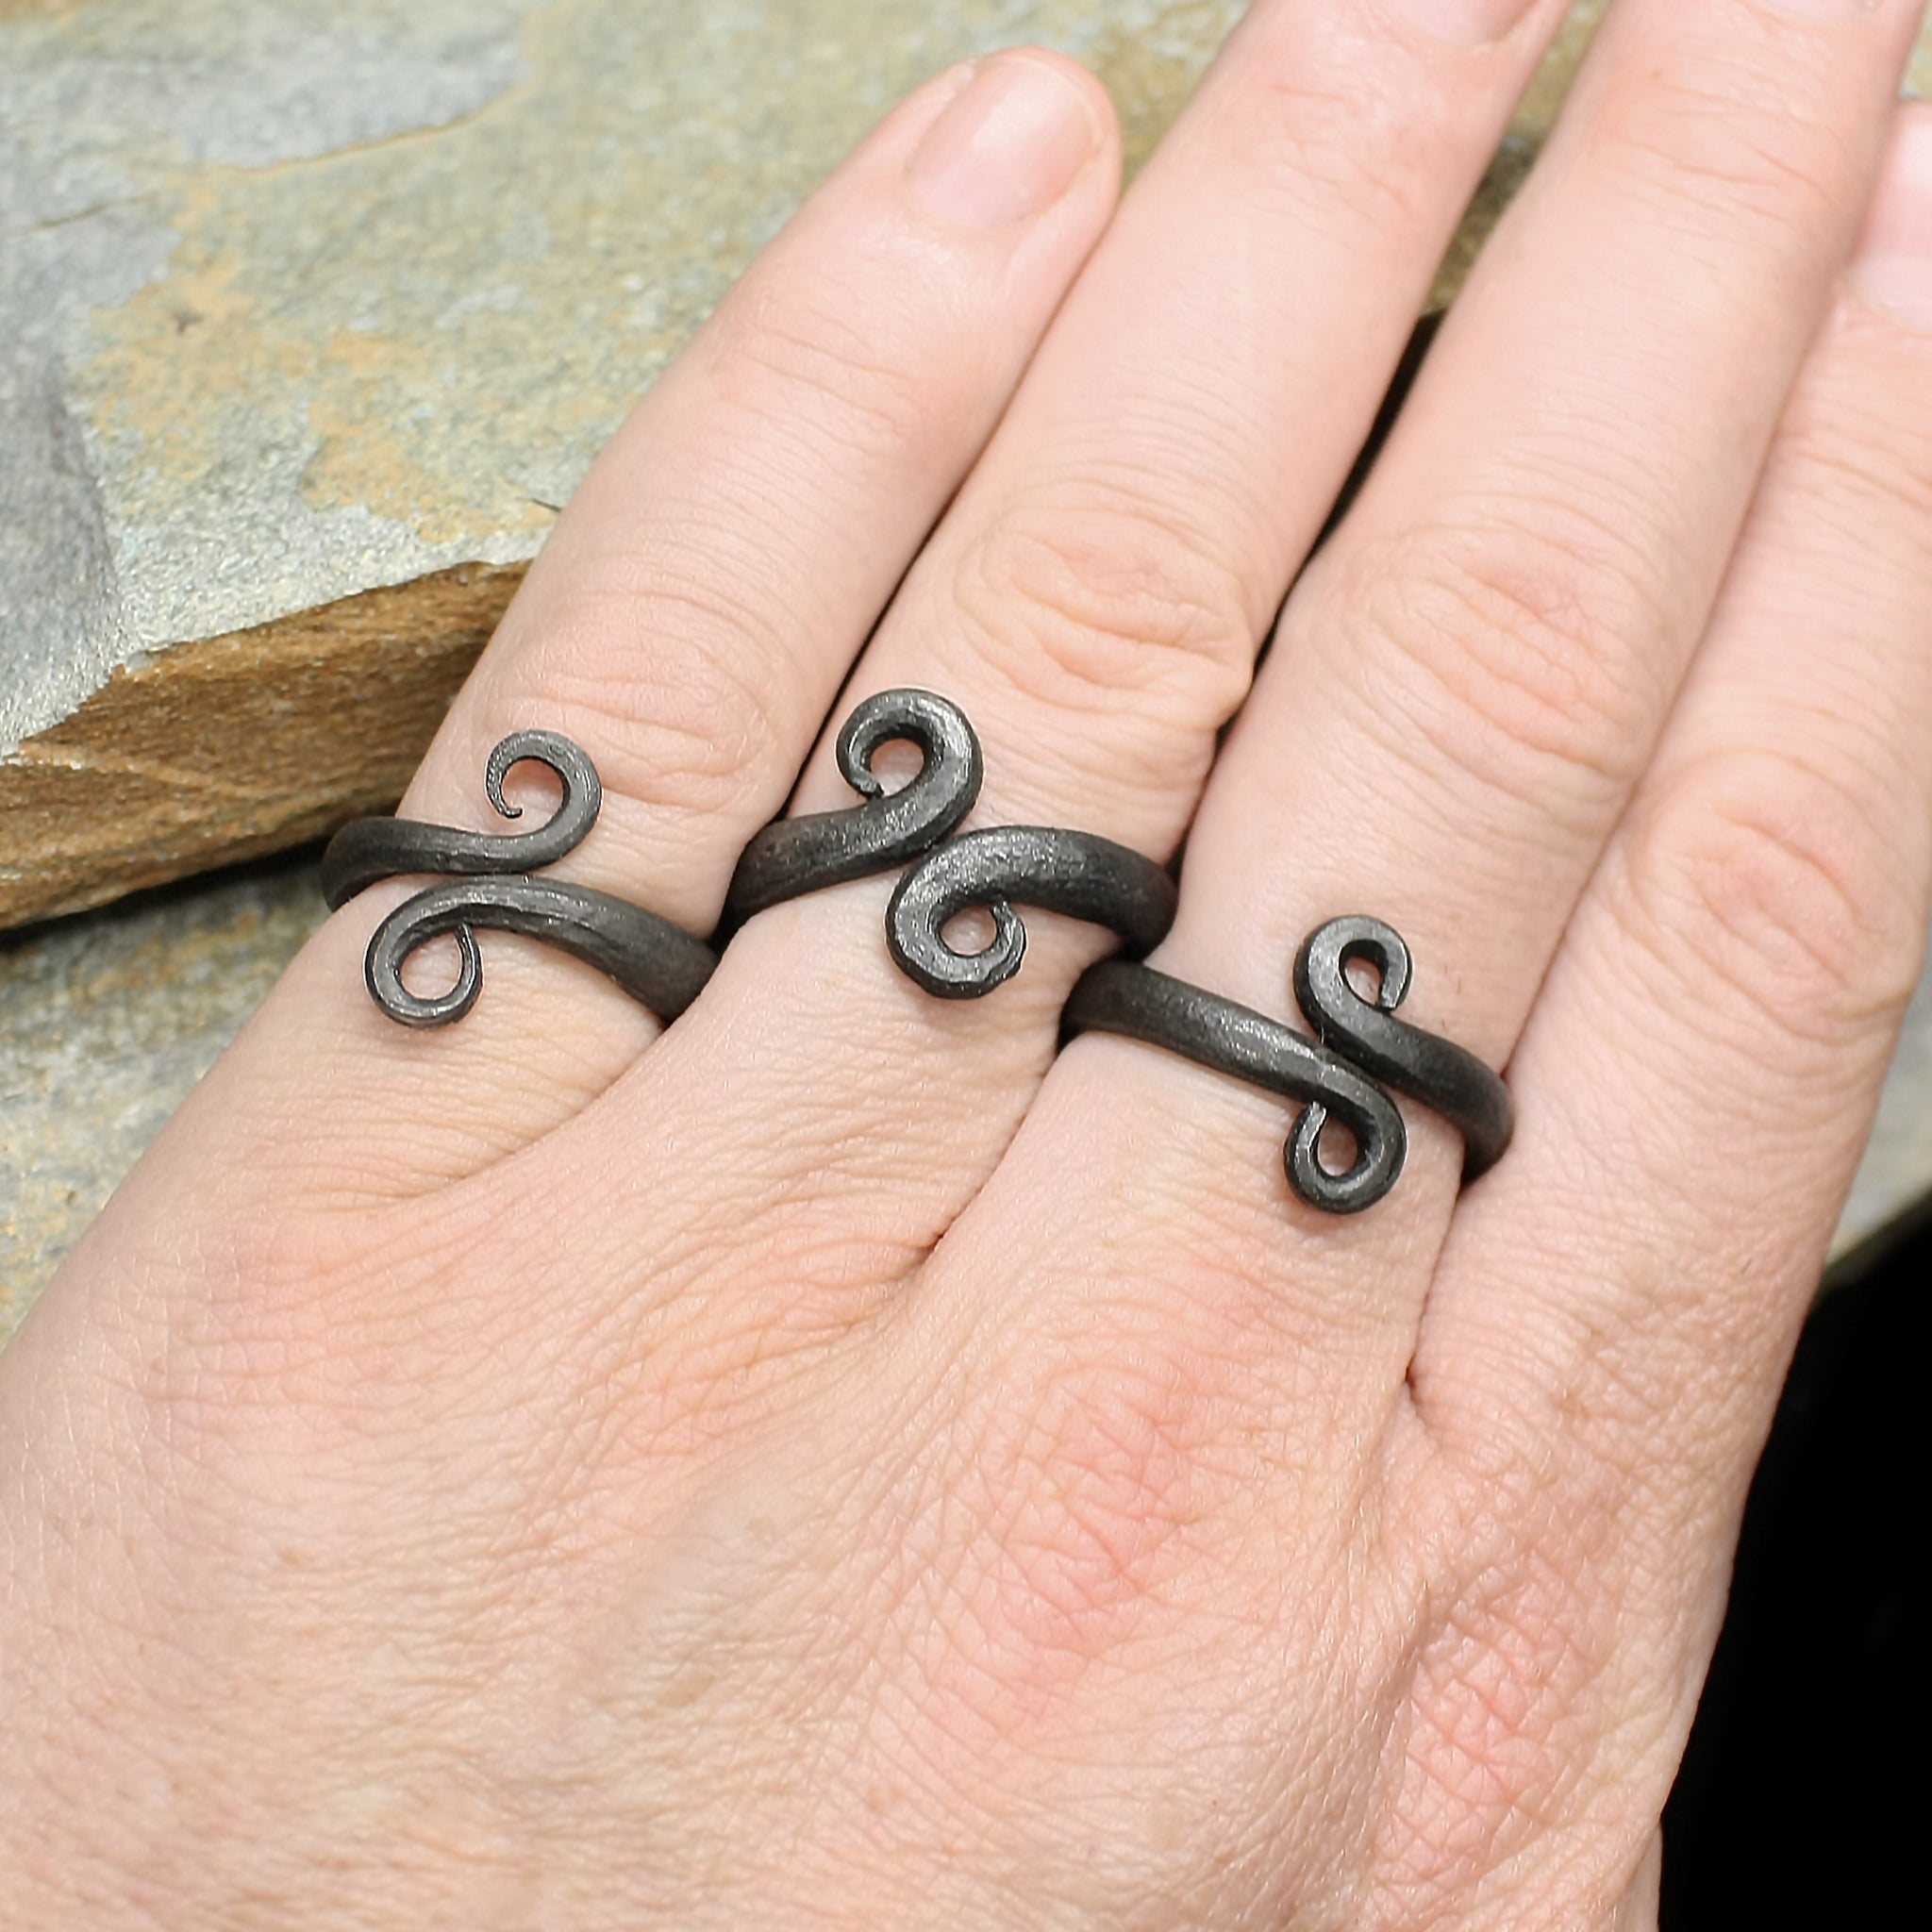 Hand-Forged Iron Viking Rings on Hand